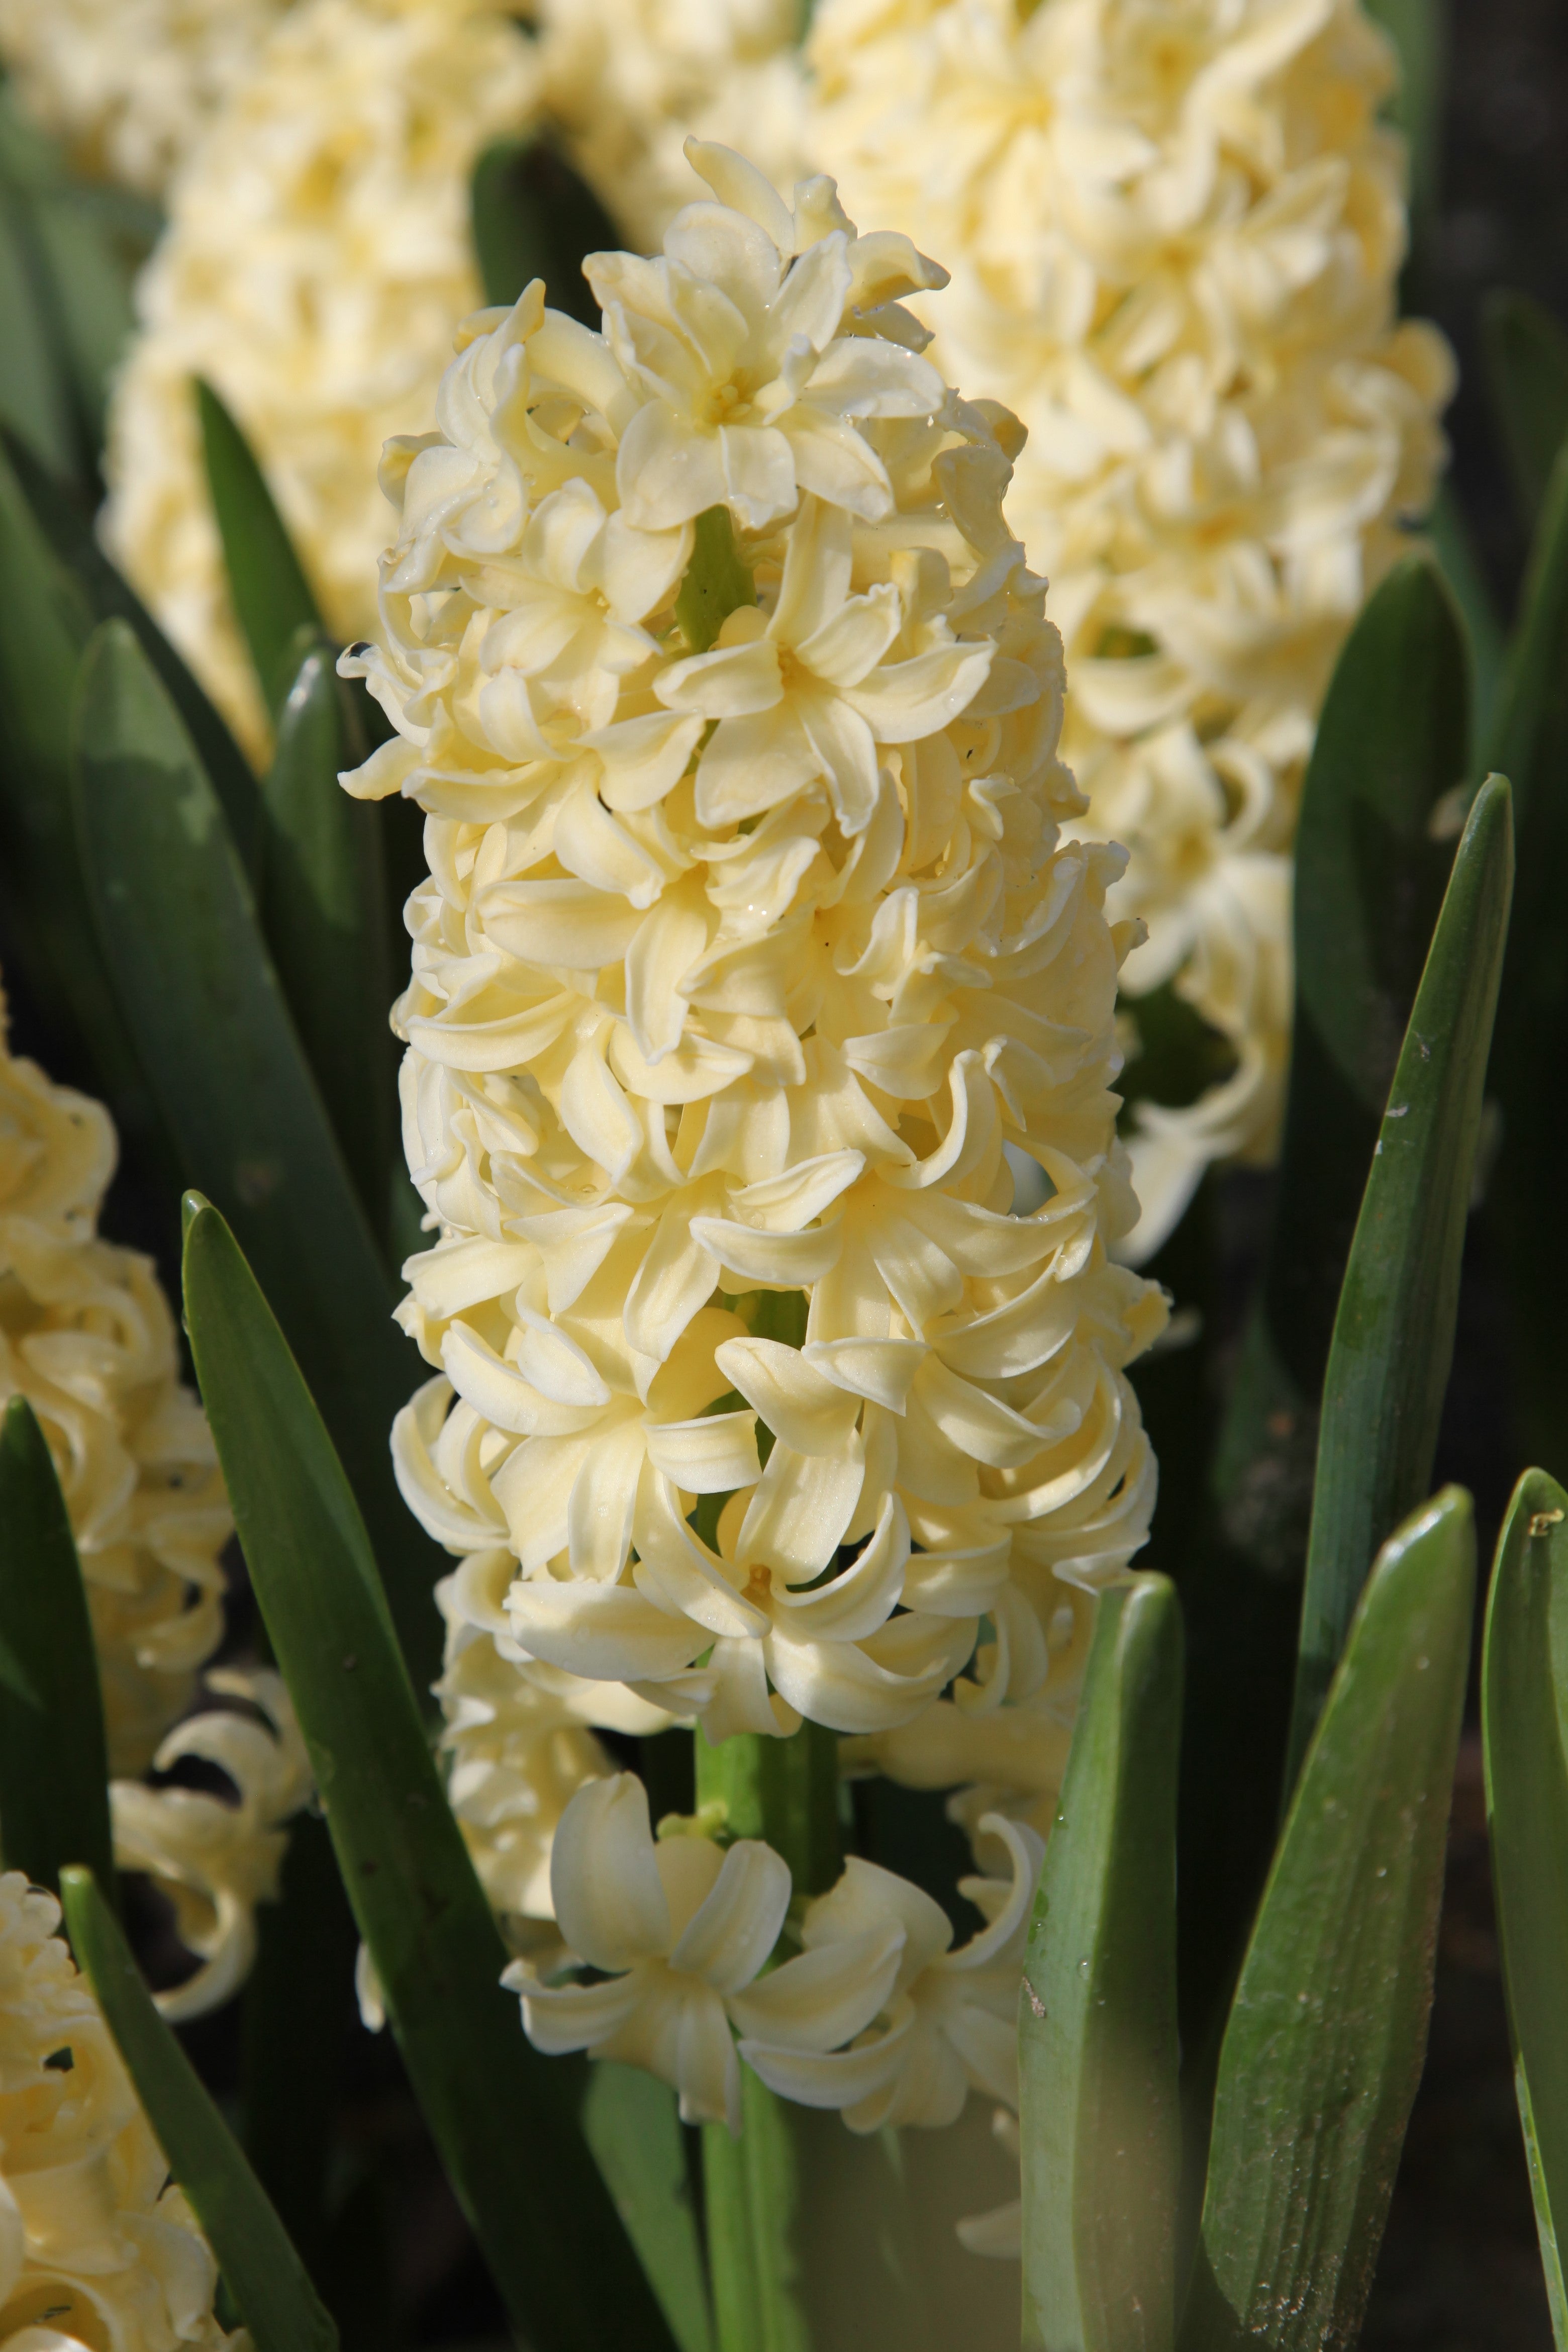 Hyacinth City of Haarlem with a soft yellow color and small florets